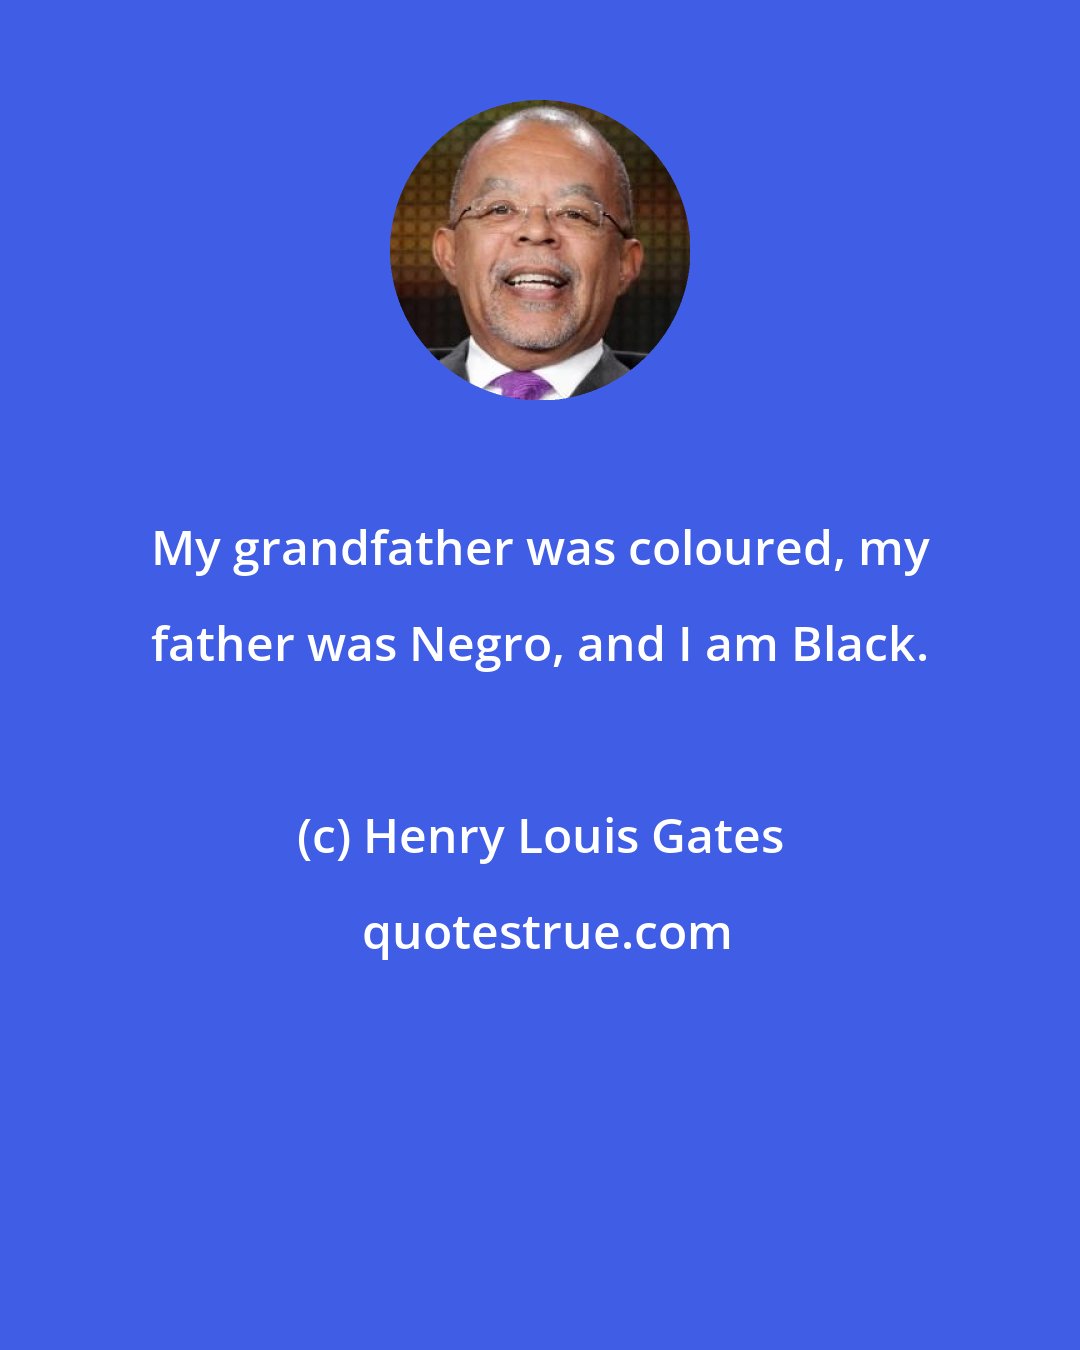 Henry Louis Gates: My grandfather was coloured, my father was Negro, and I am Black.